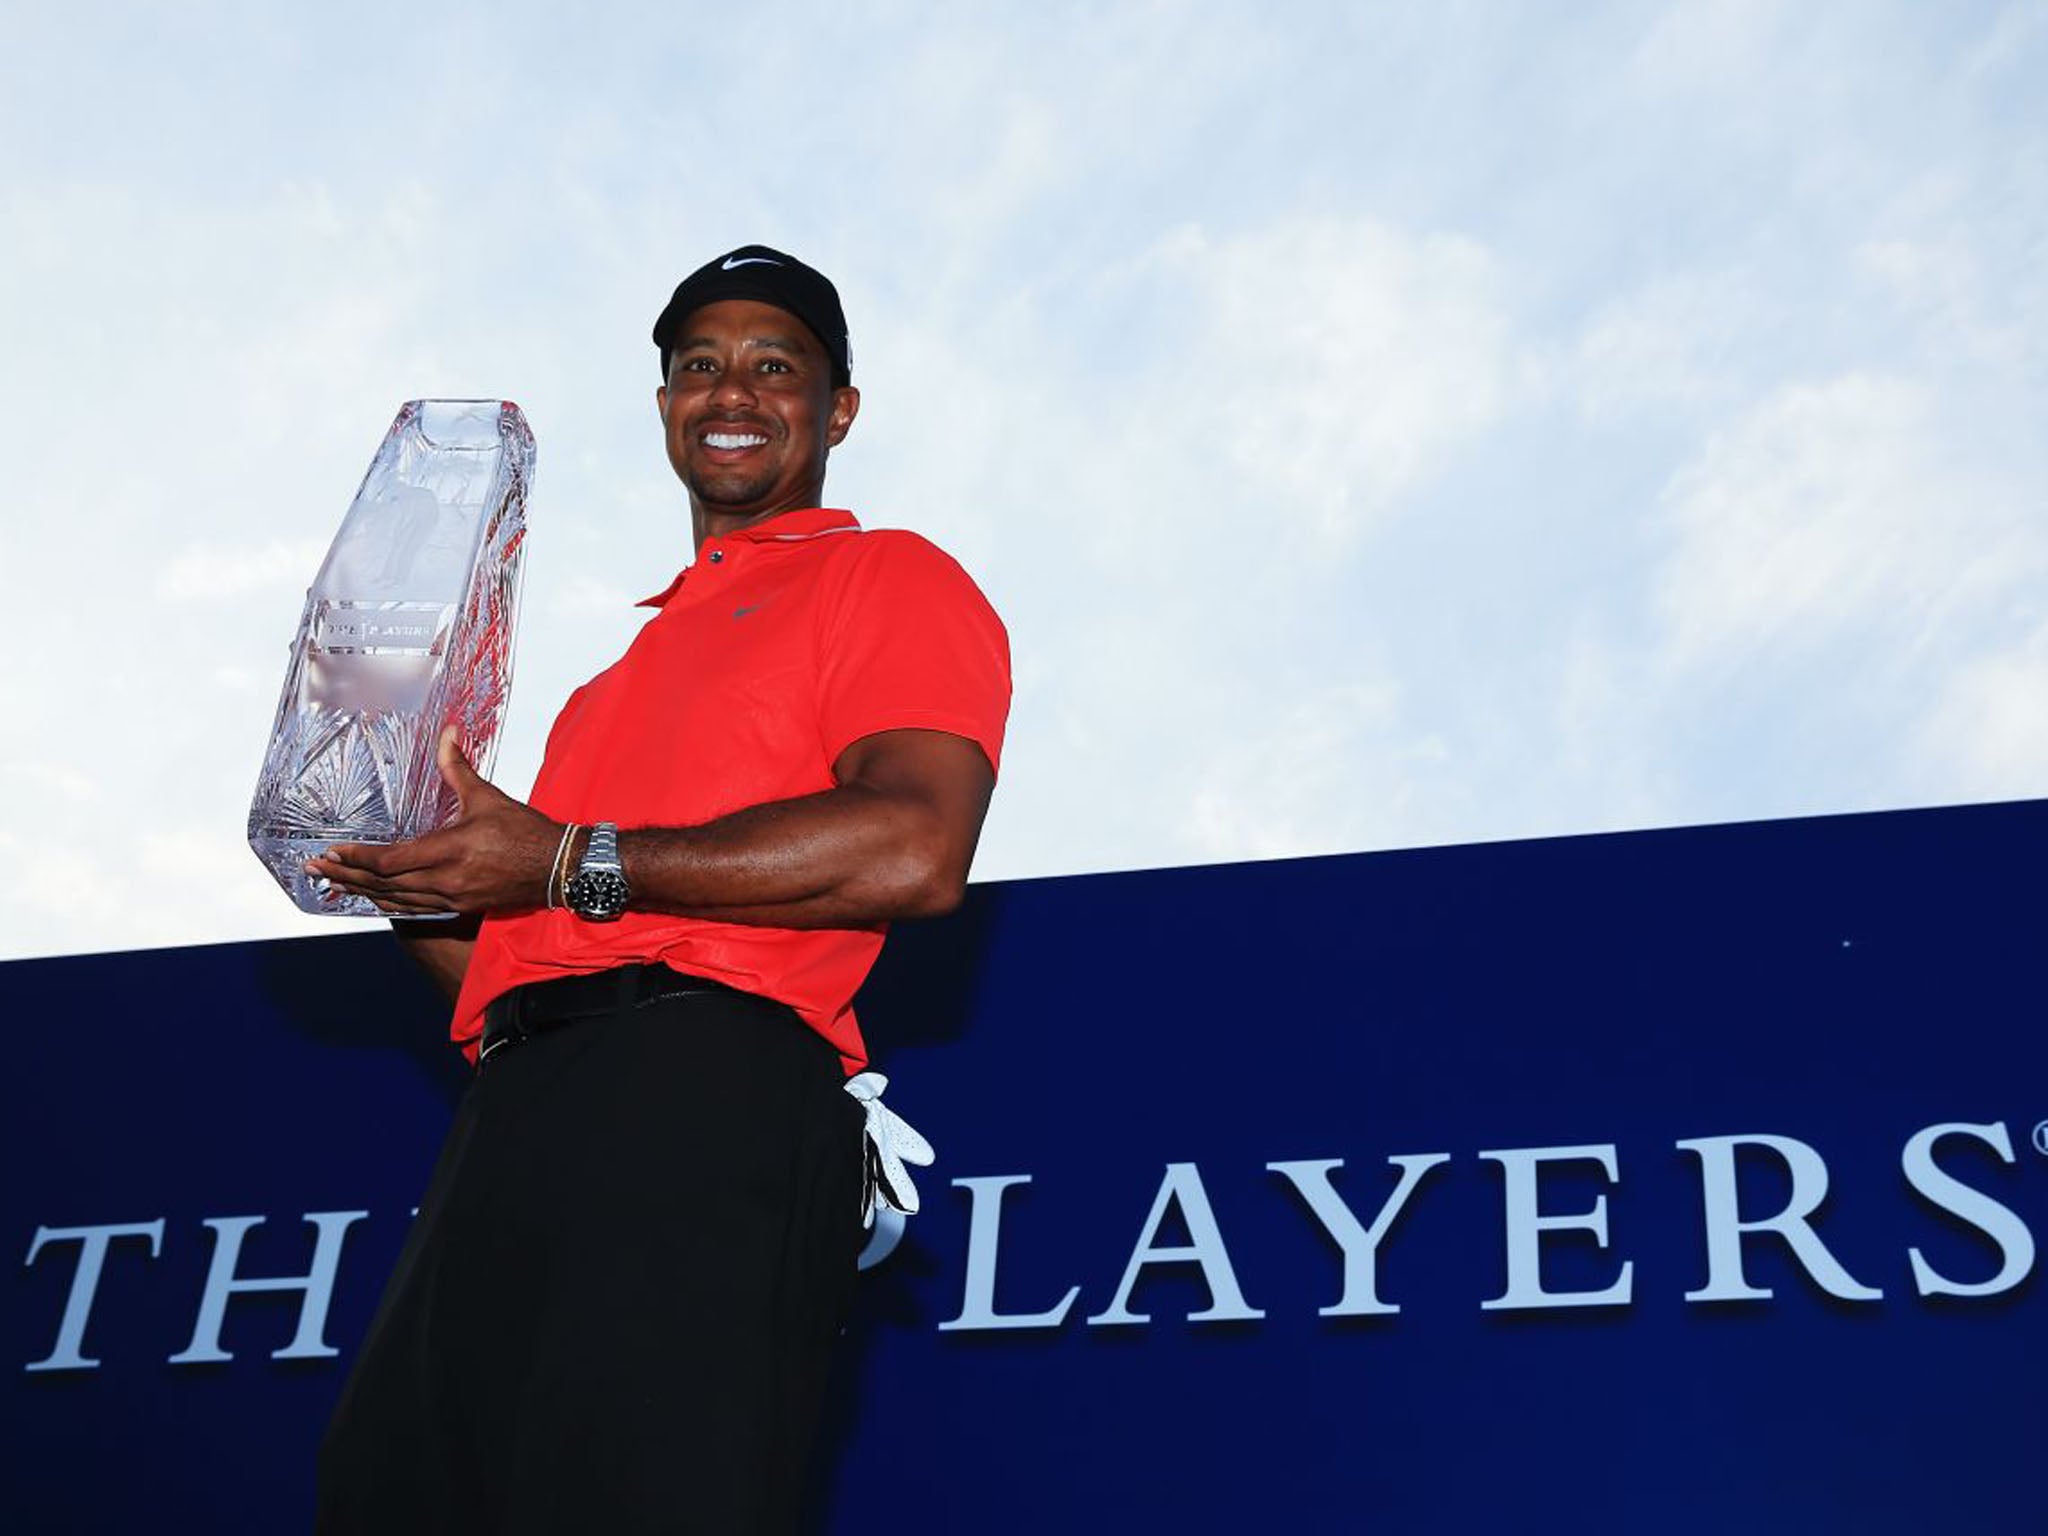 Tiger Woods holds the winner's trophy after the final round of The Players Championship (Richard Heathcote/Getty Images)